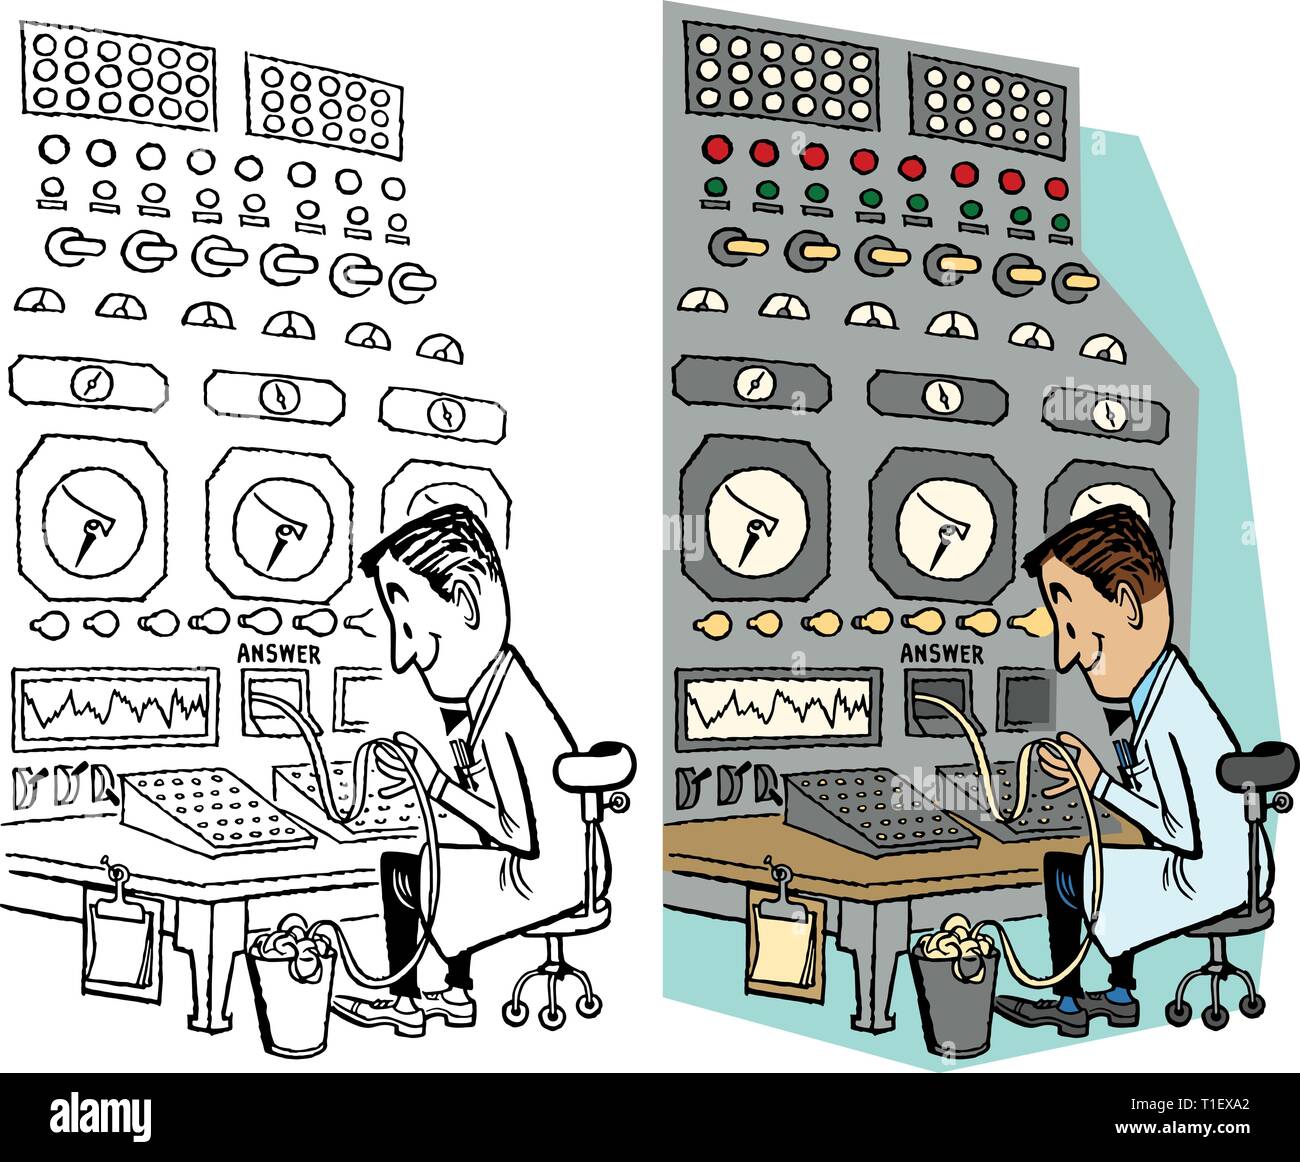 A man uses an old fashioned computer to get an answer. Stock Vector